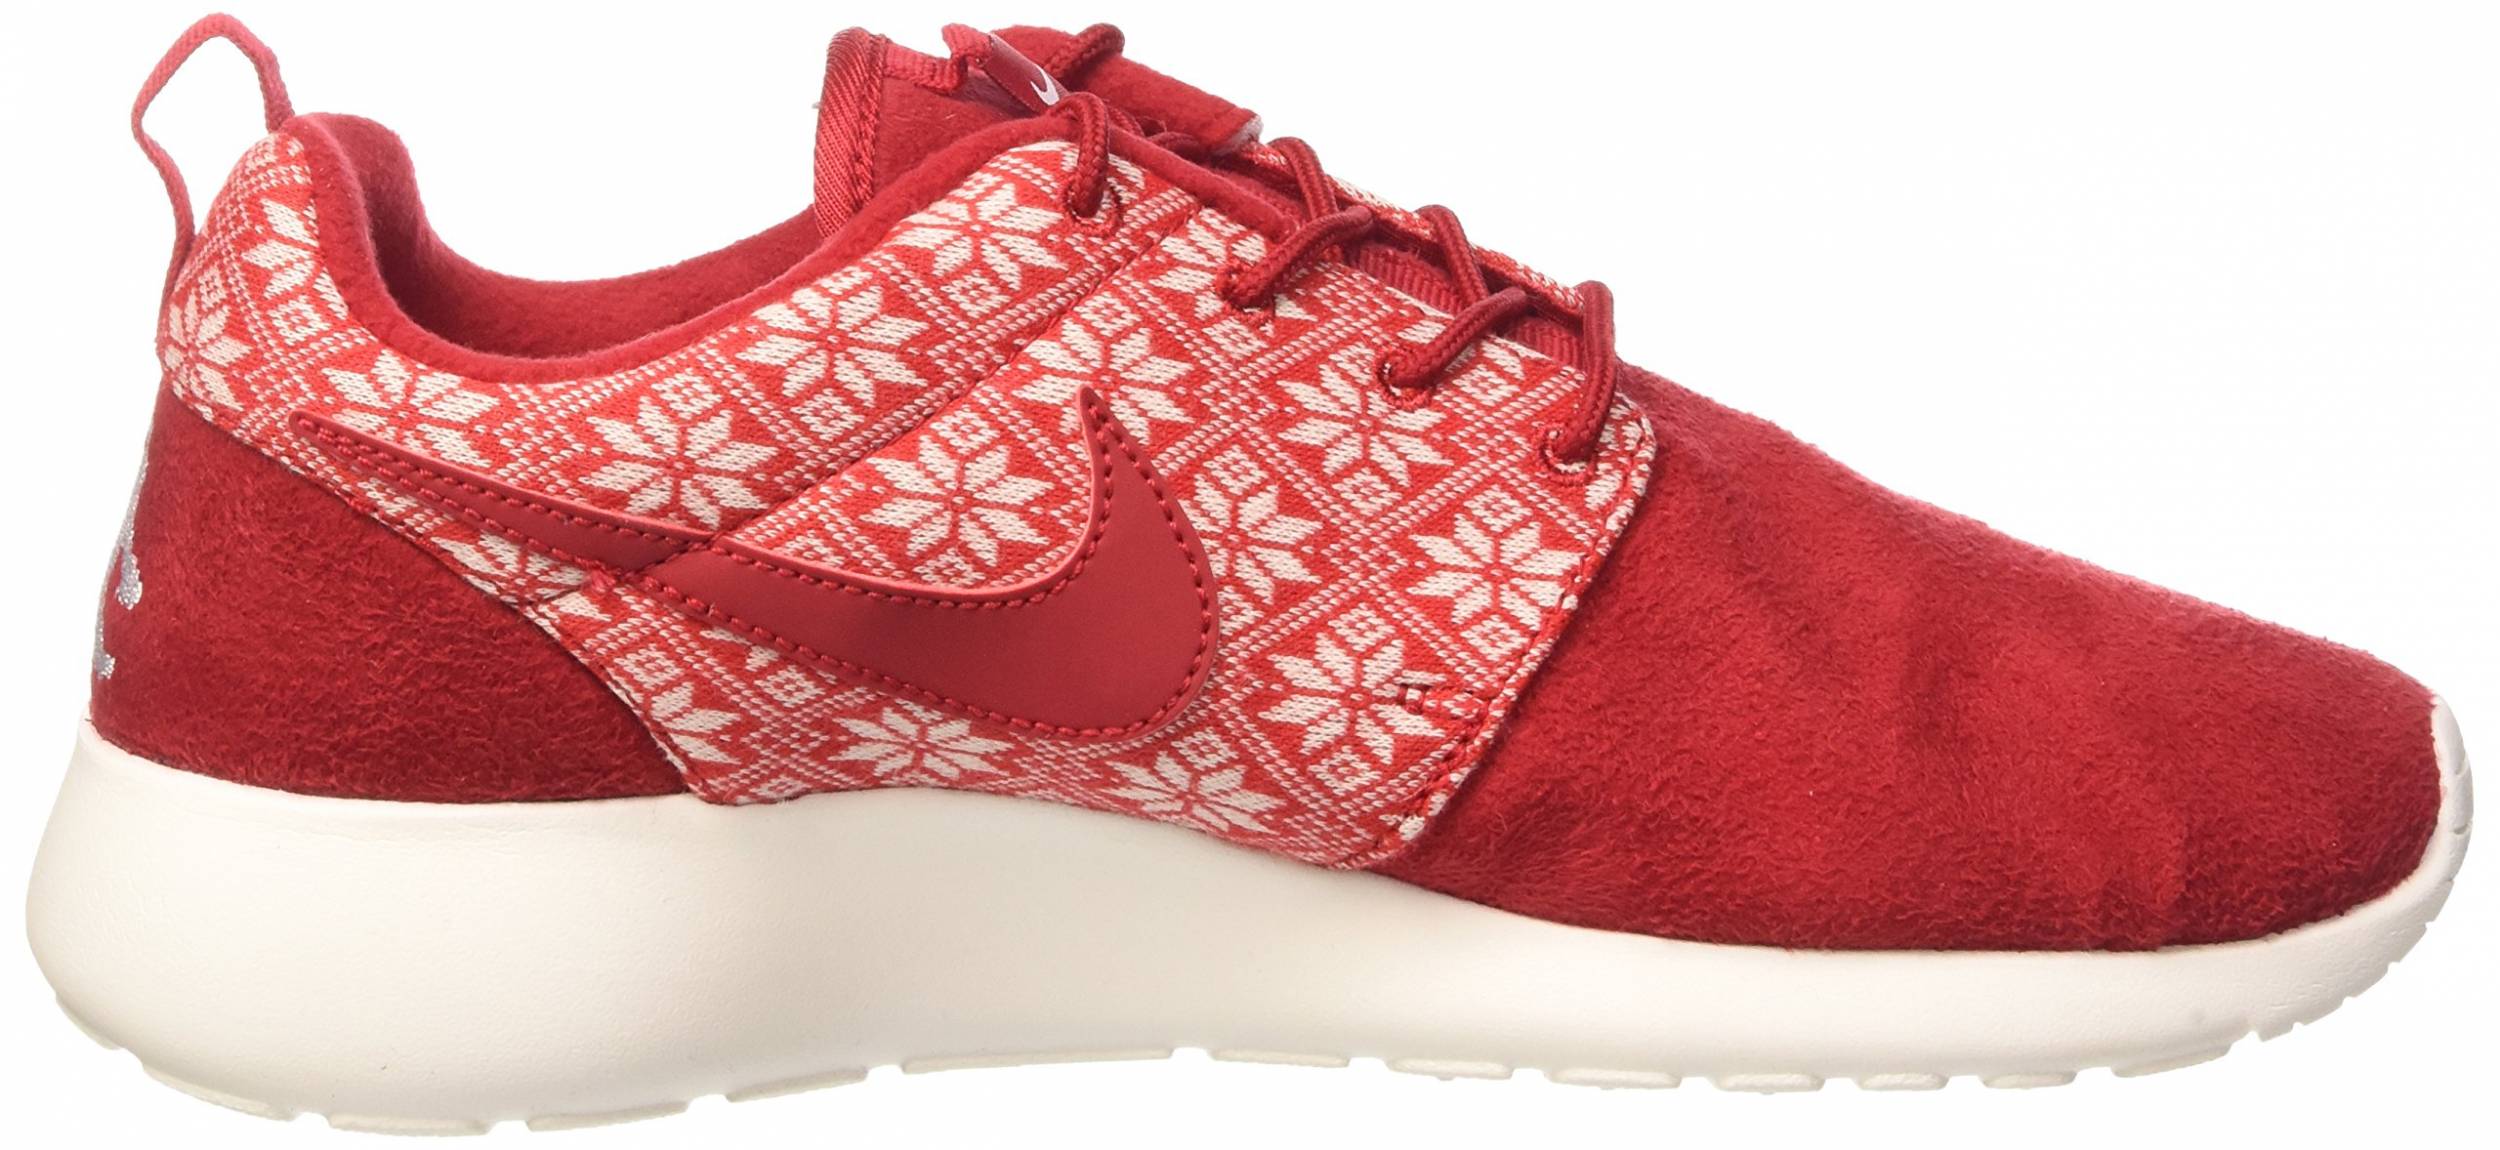 Only £46 + Review of Nike Roshe One Winter | RunRepeat